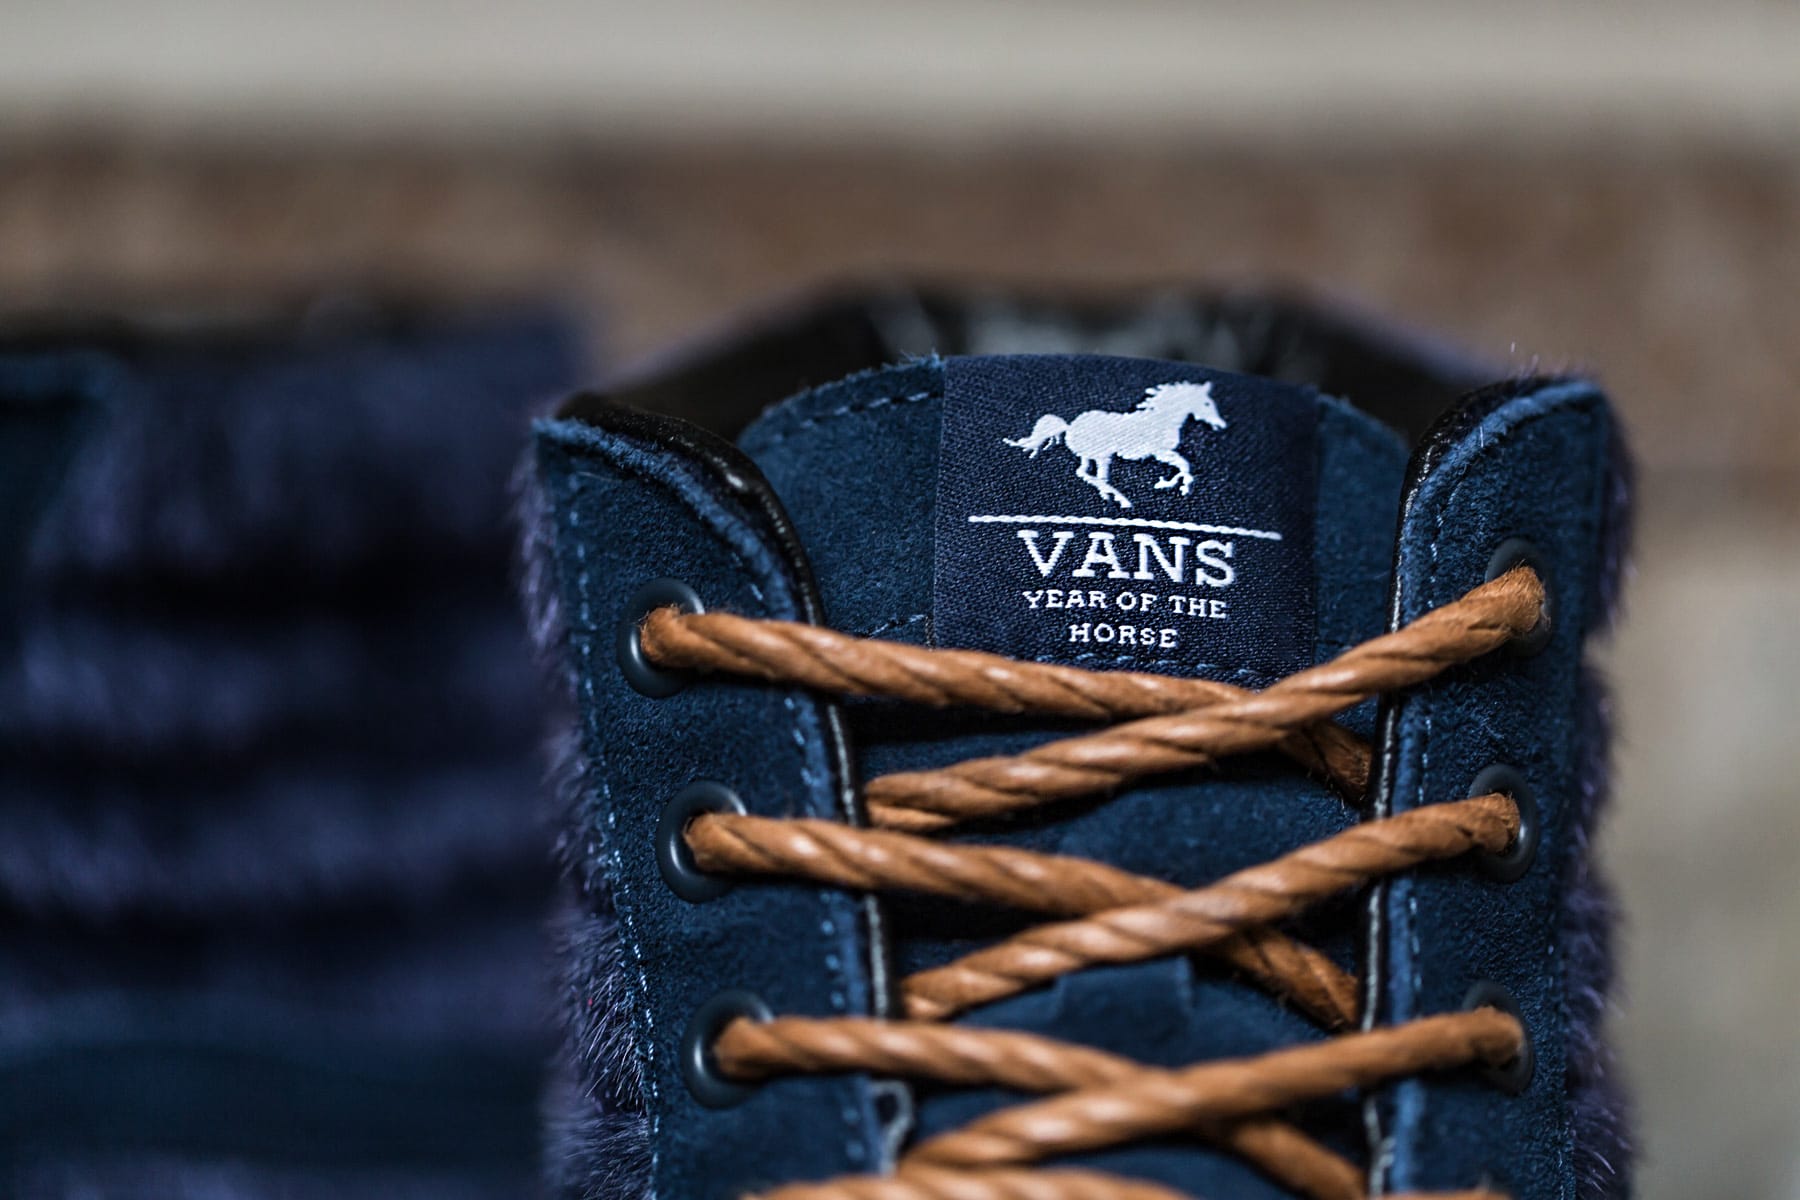 vans year of the horse